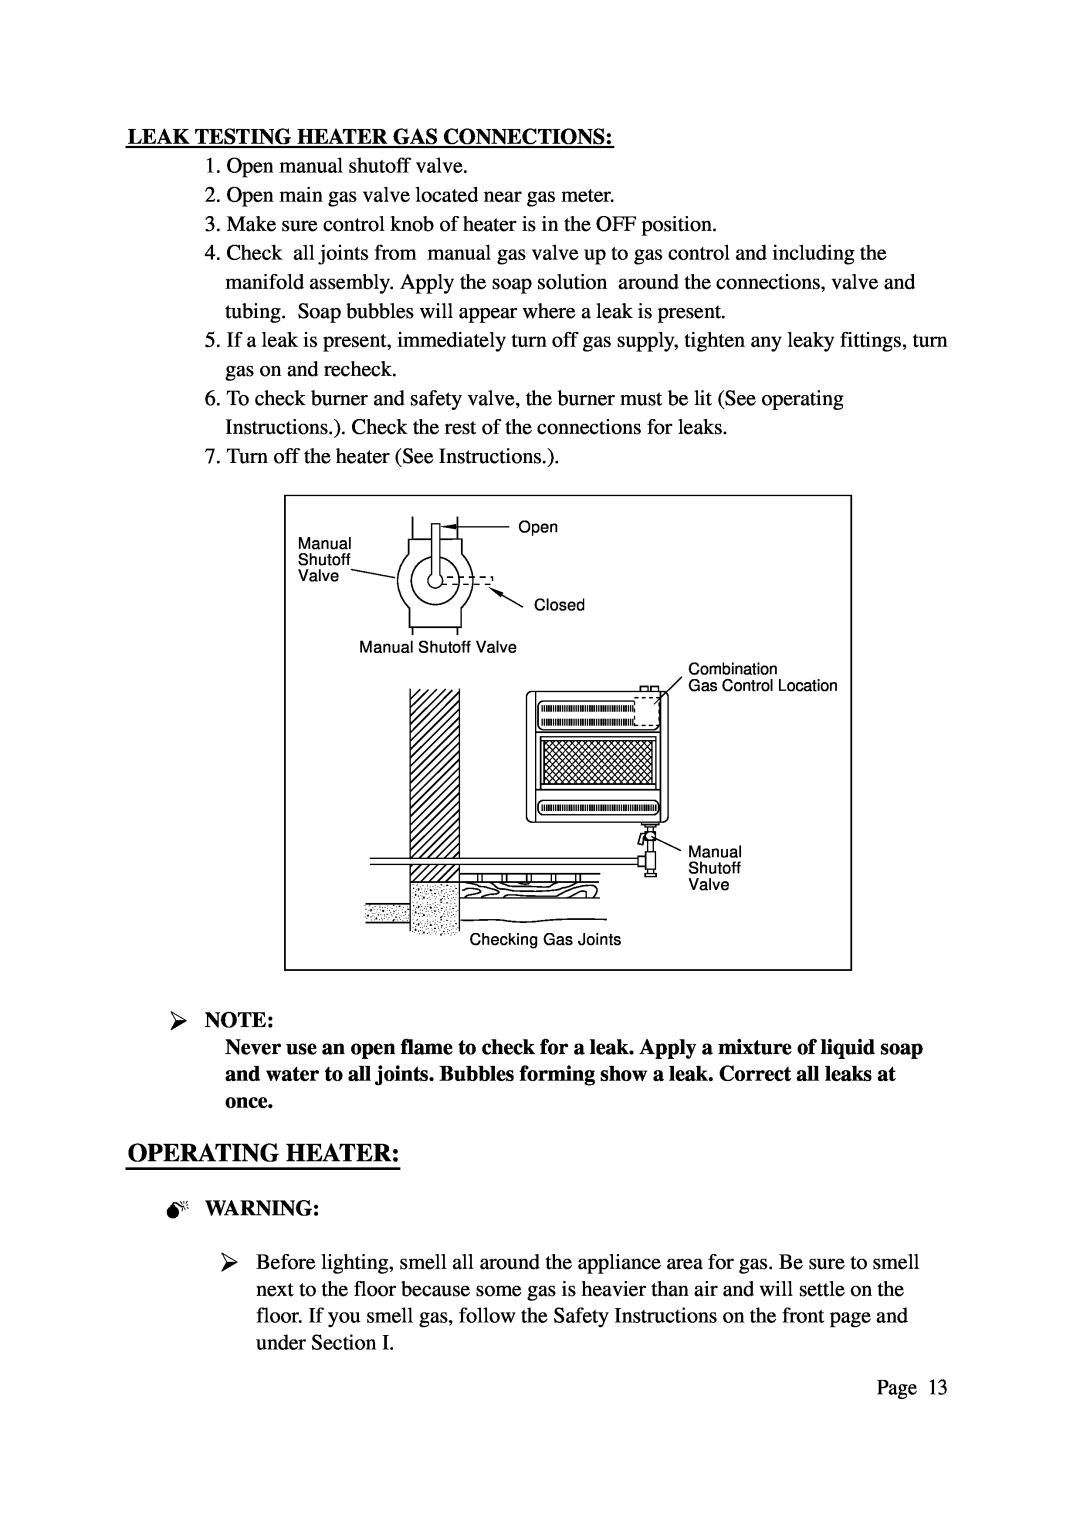 Gas-Fired Products 602-30, KLH601 installation manual Operating Heater, Leak Testing Heater Gas Connections 